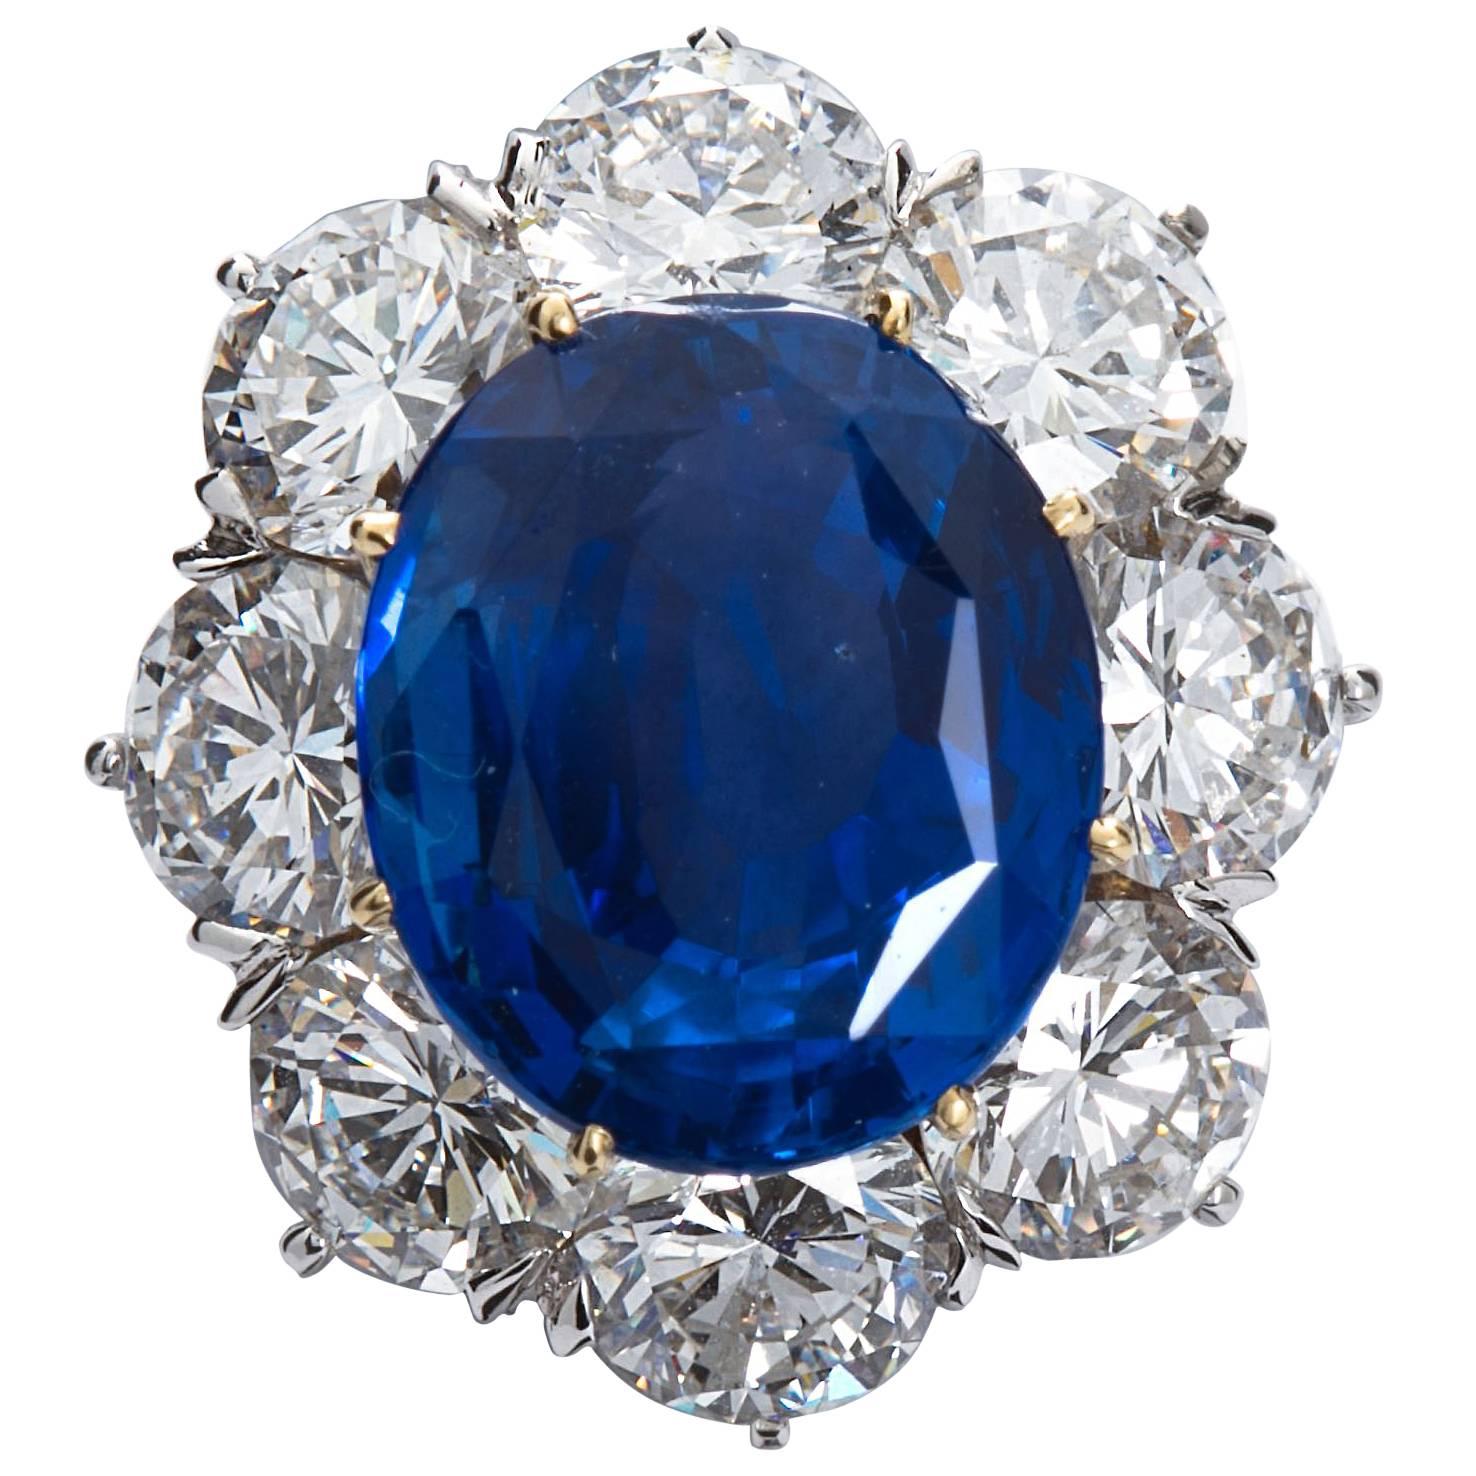 Unheated 7.28 Carat Oval Blue Sapphire Cluster Ring